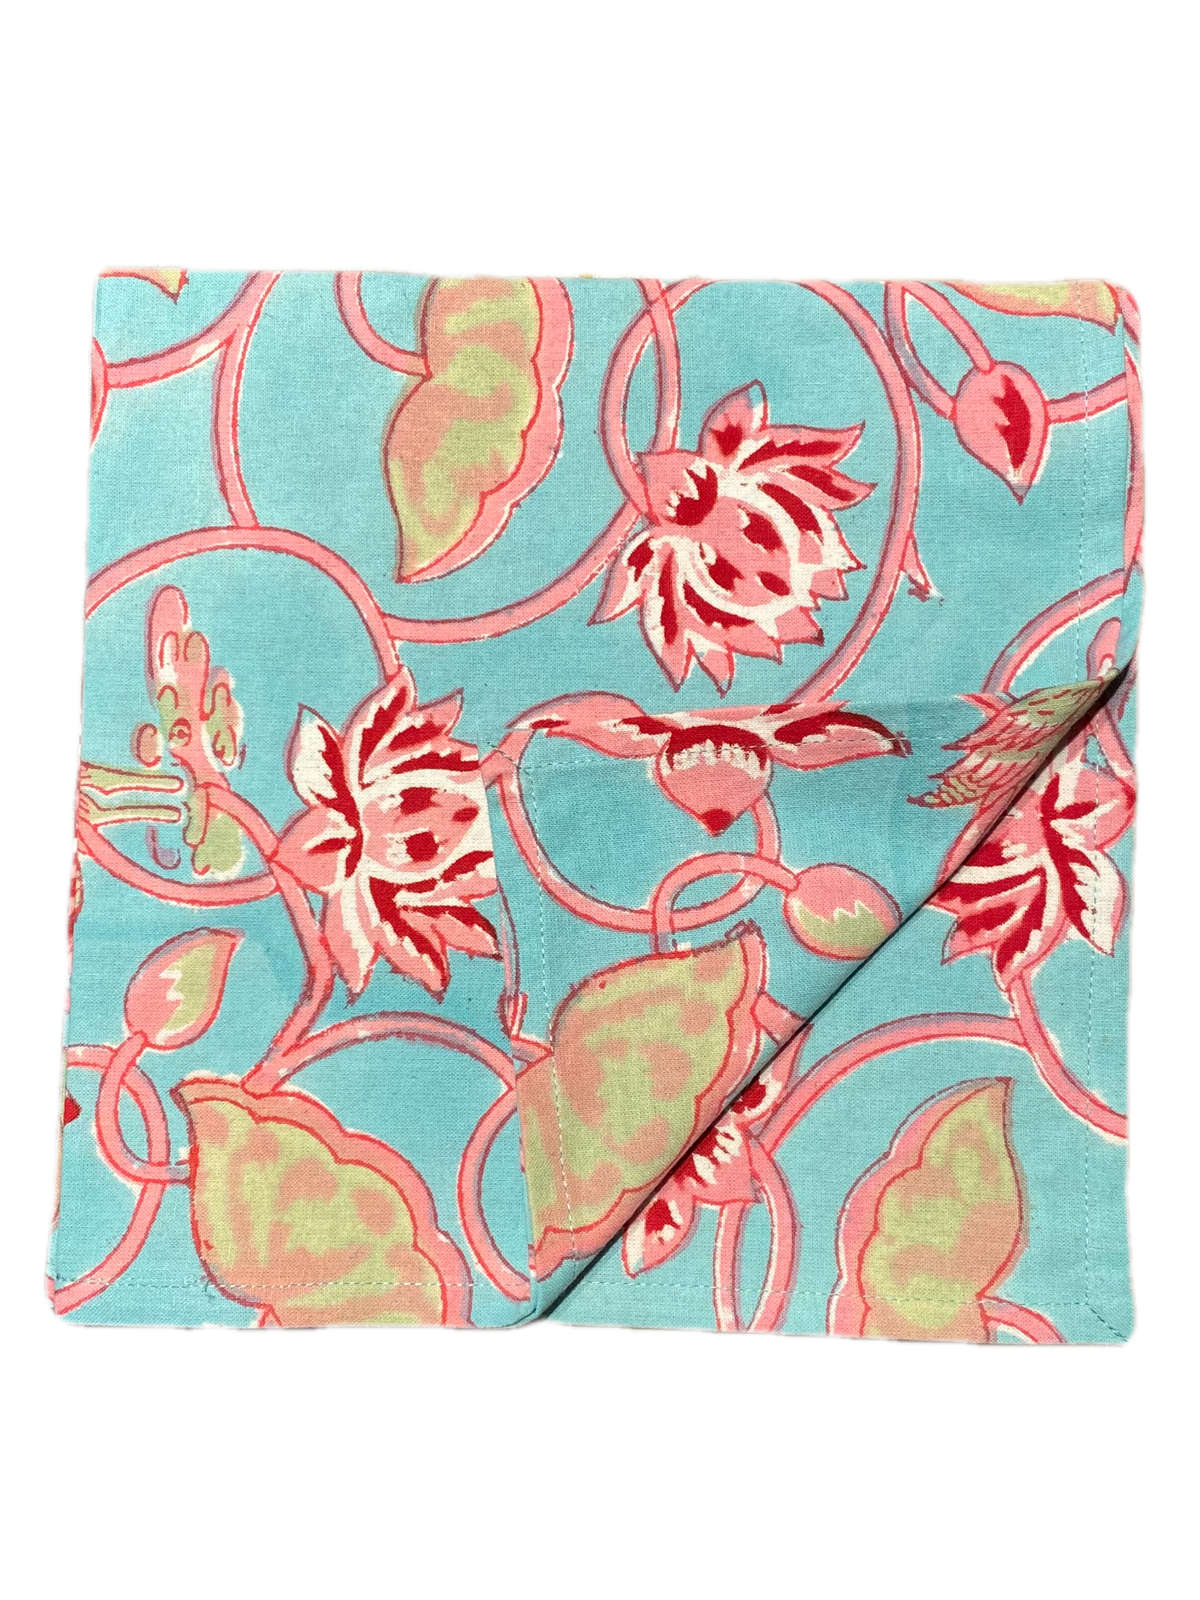 Block Print Red Dahlias in Turquoise Tablecloth Napkin